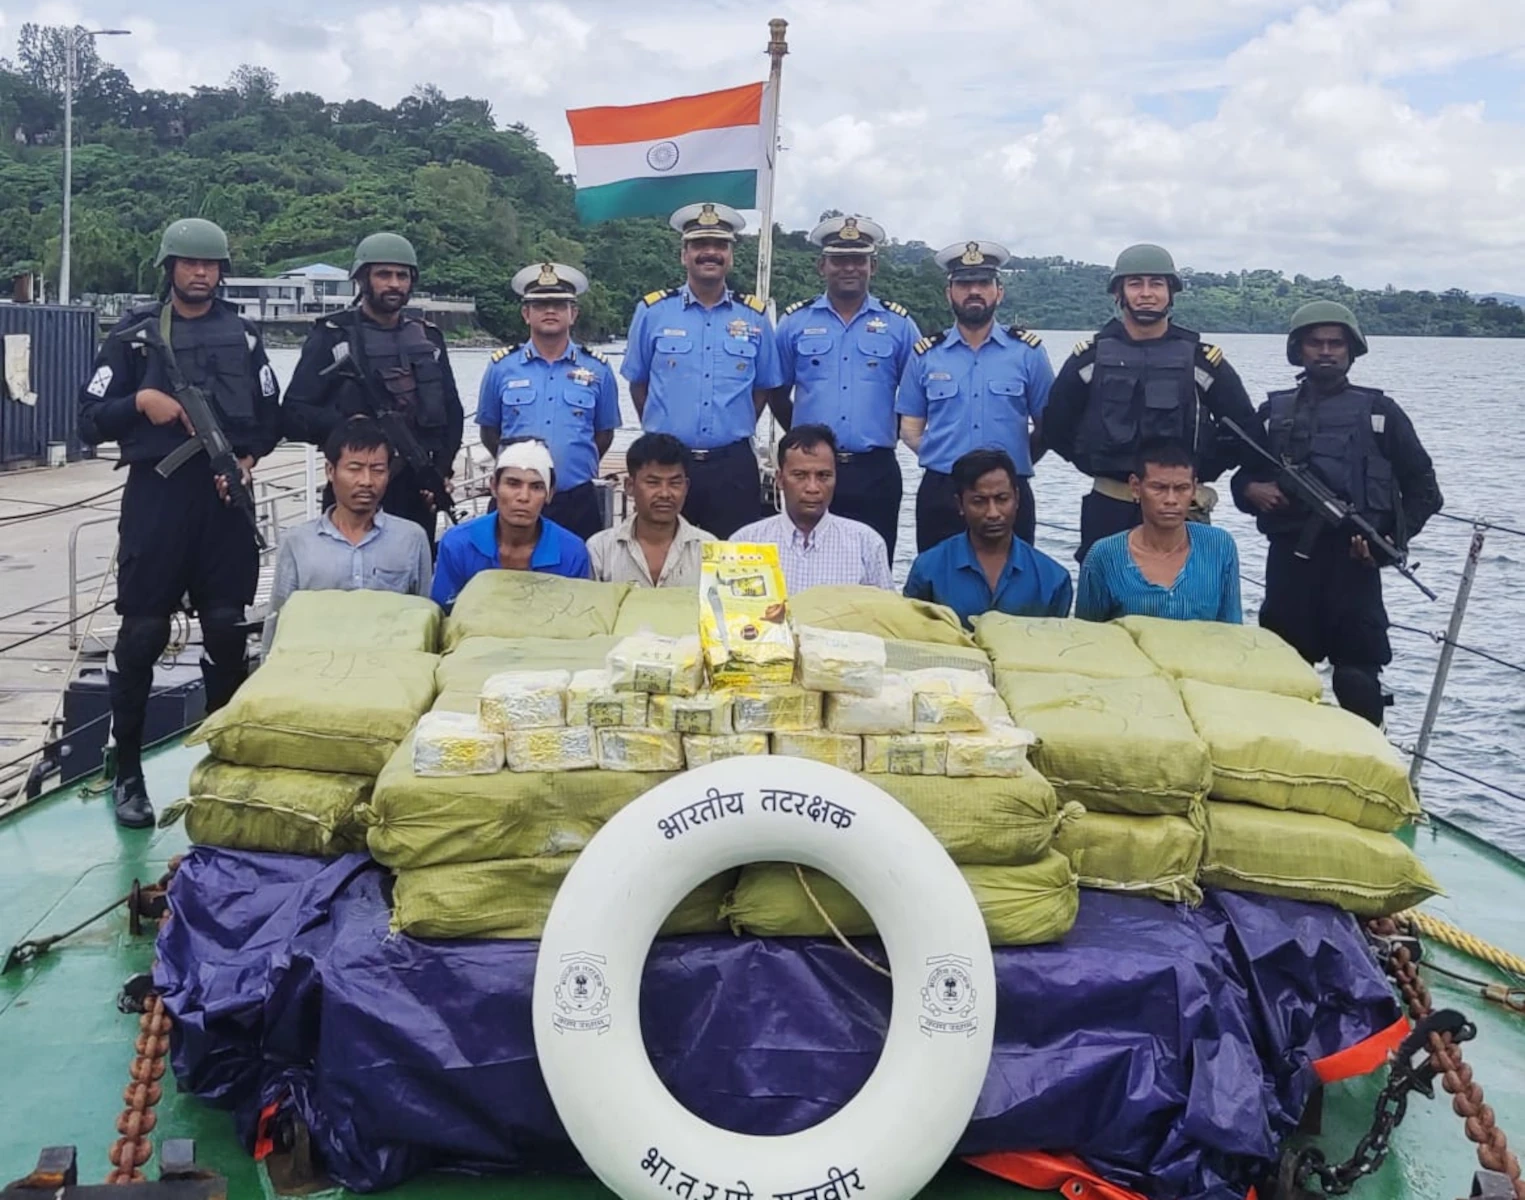 India supplies to Mexican drug cartel